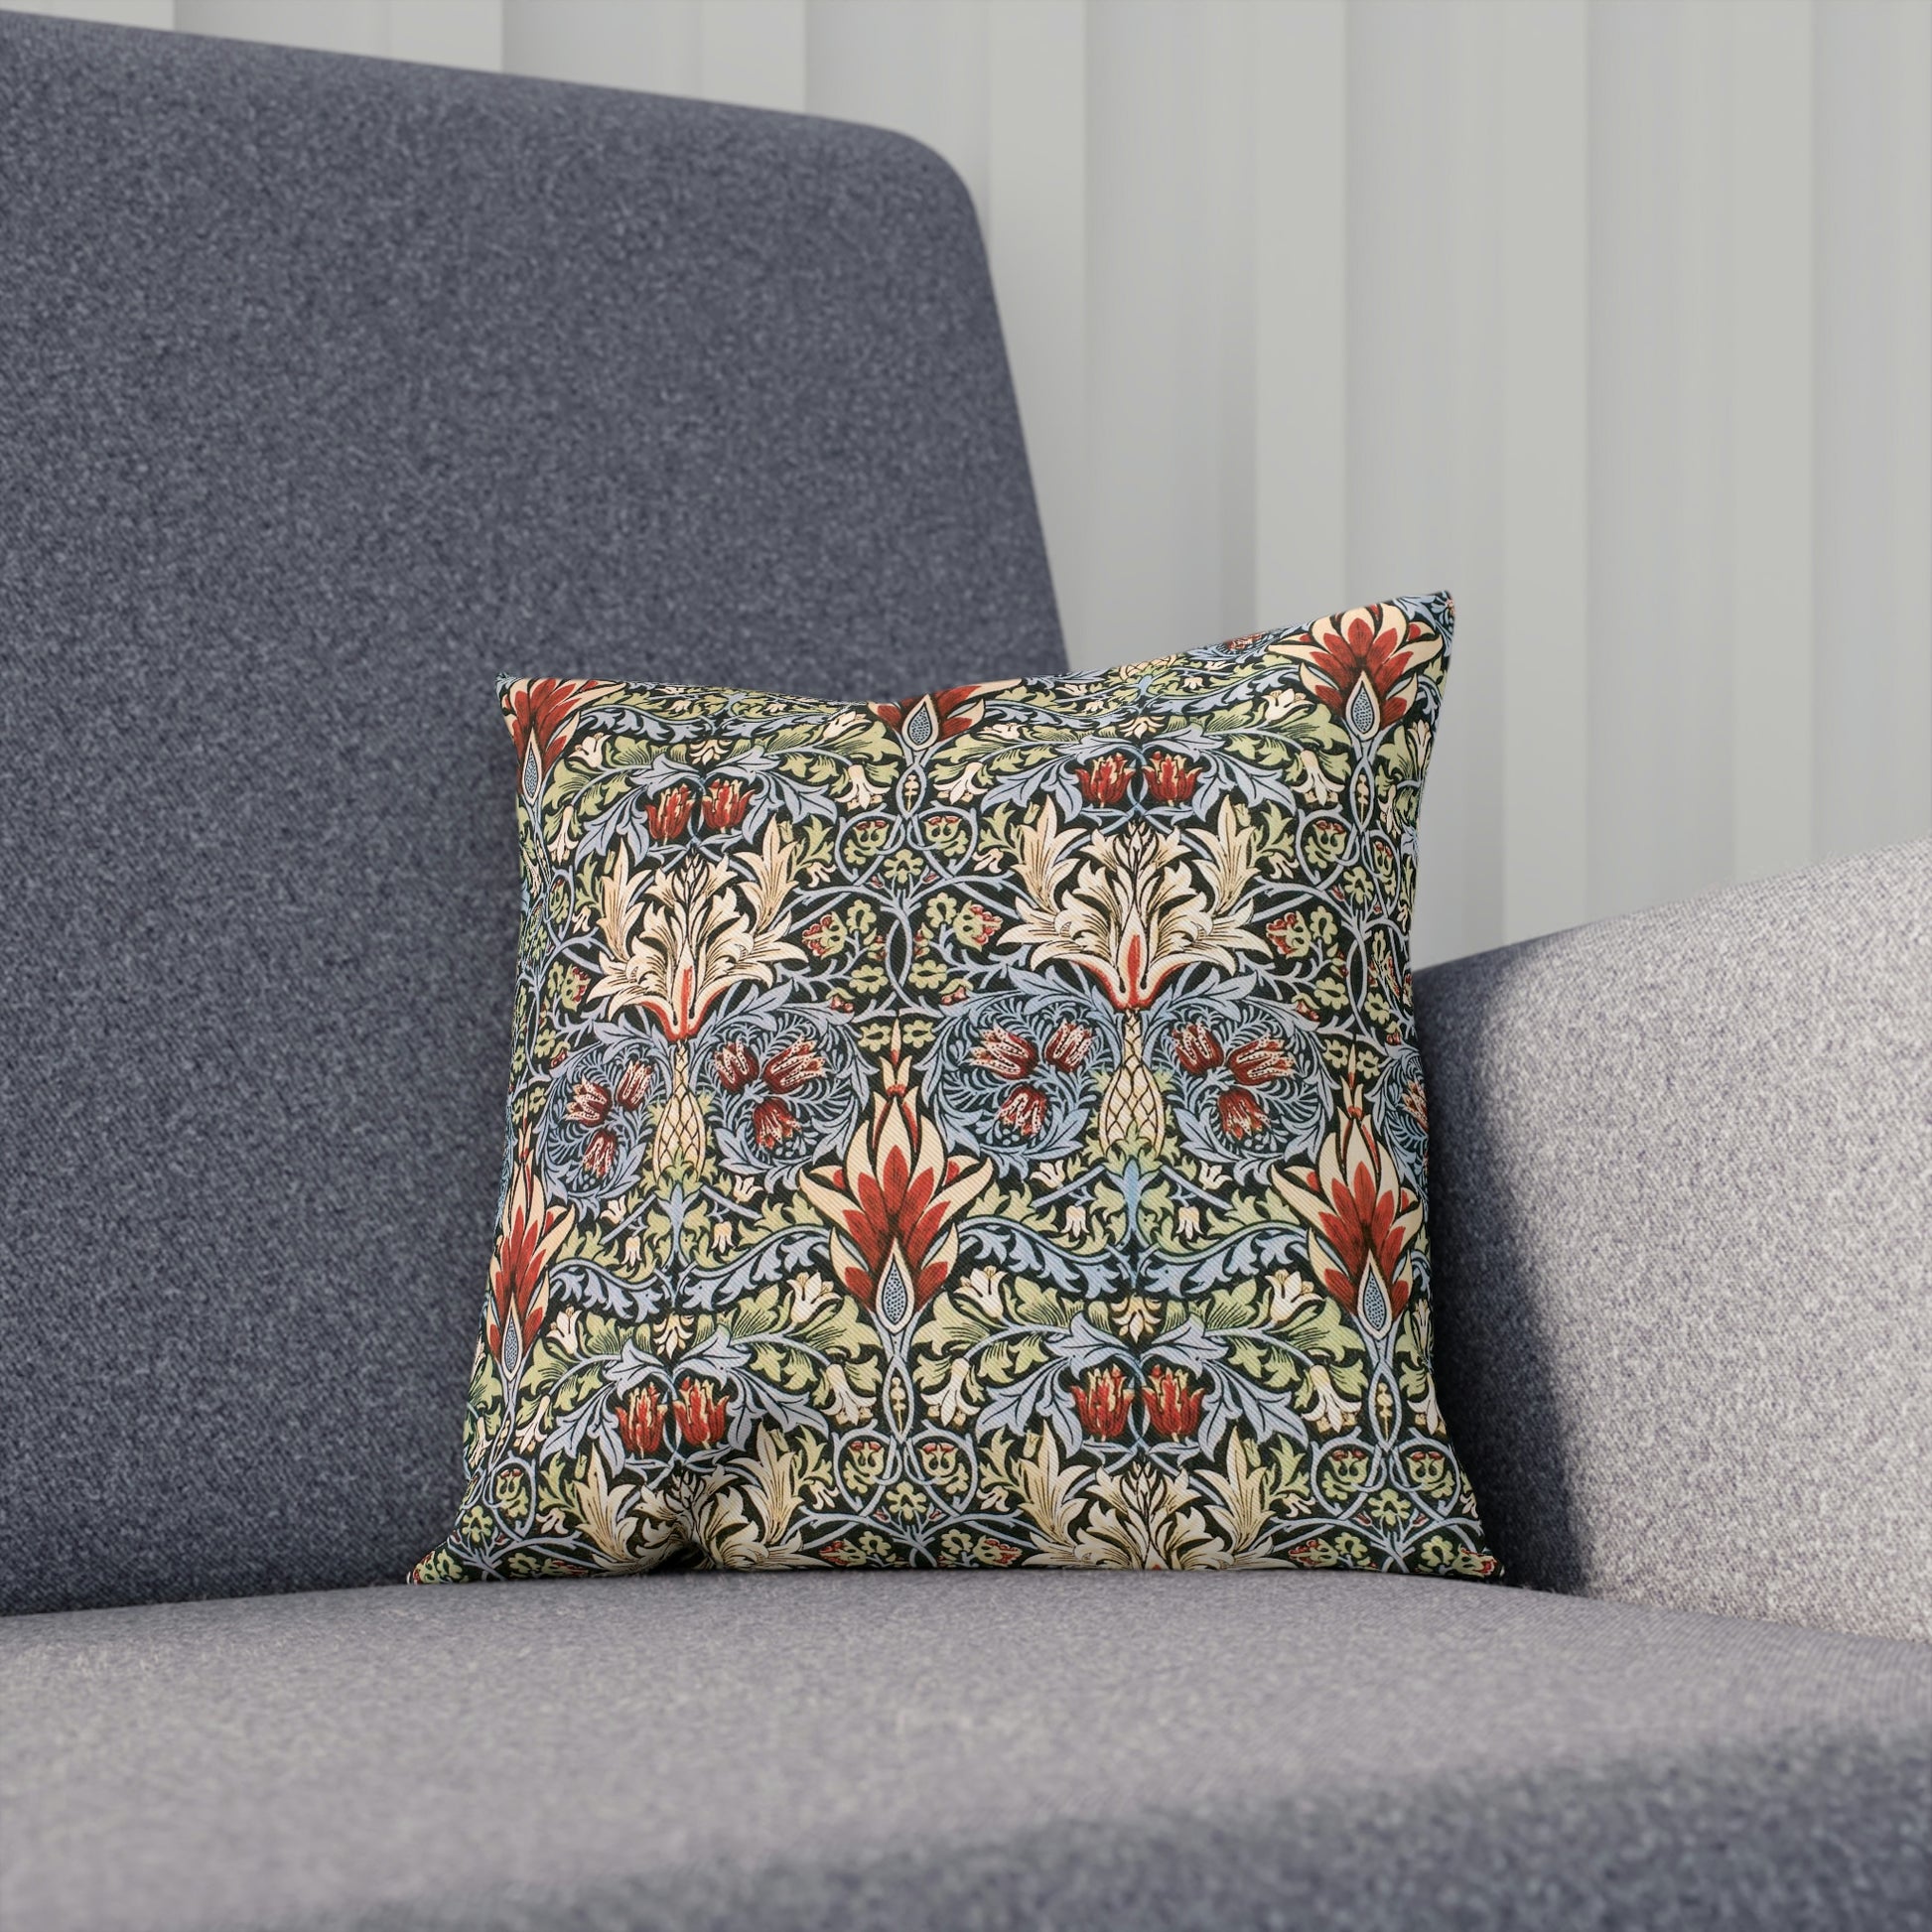 William-Morris-and-Co-Cushion-and-Cushion-Cover-Snakeshead-Collection-10